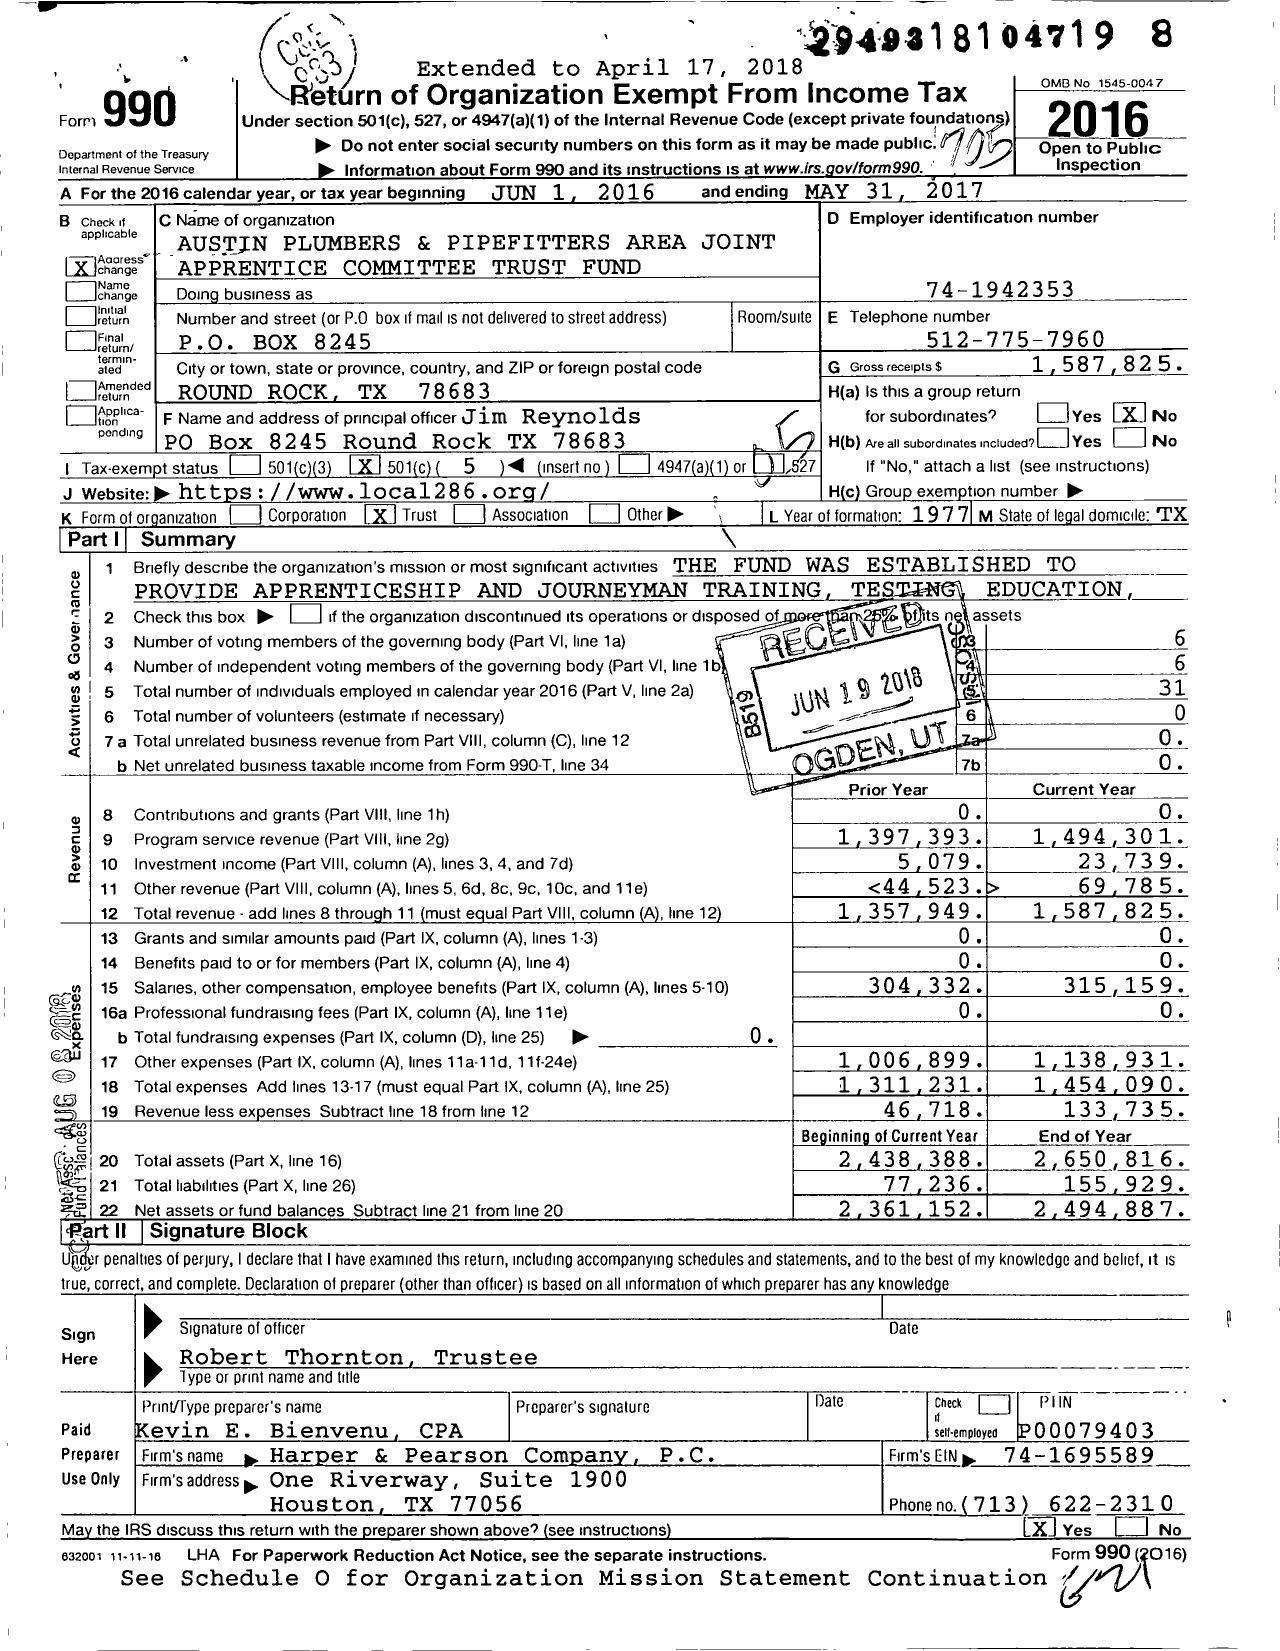 Image of first page of 2016 Form 990O for Austin Plumbers and Pipefitters Area Joint Apprentice Committee Trust Fund